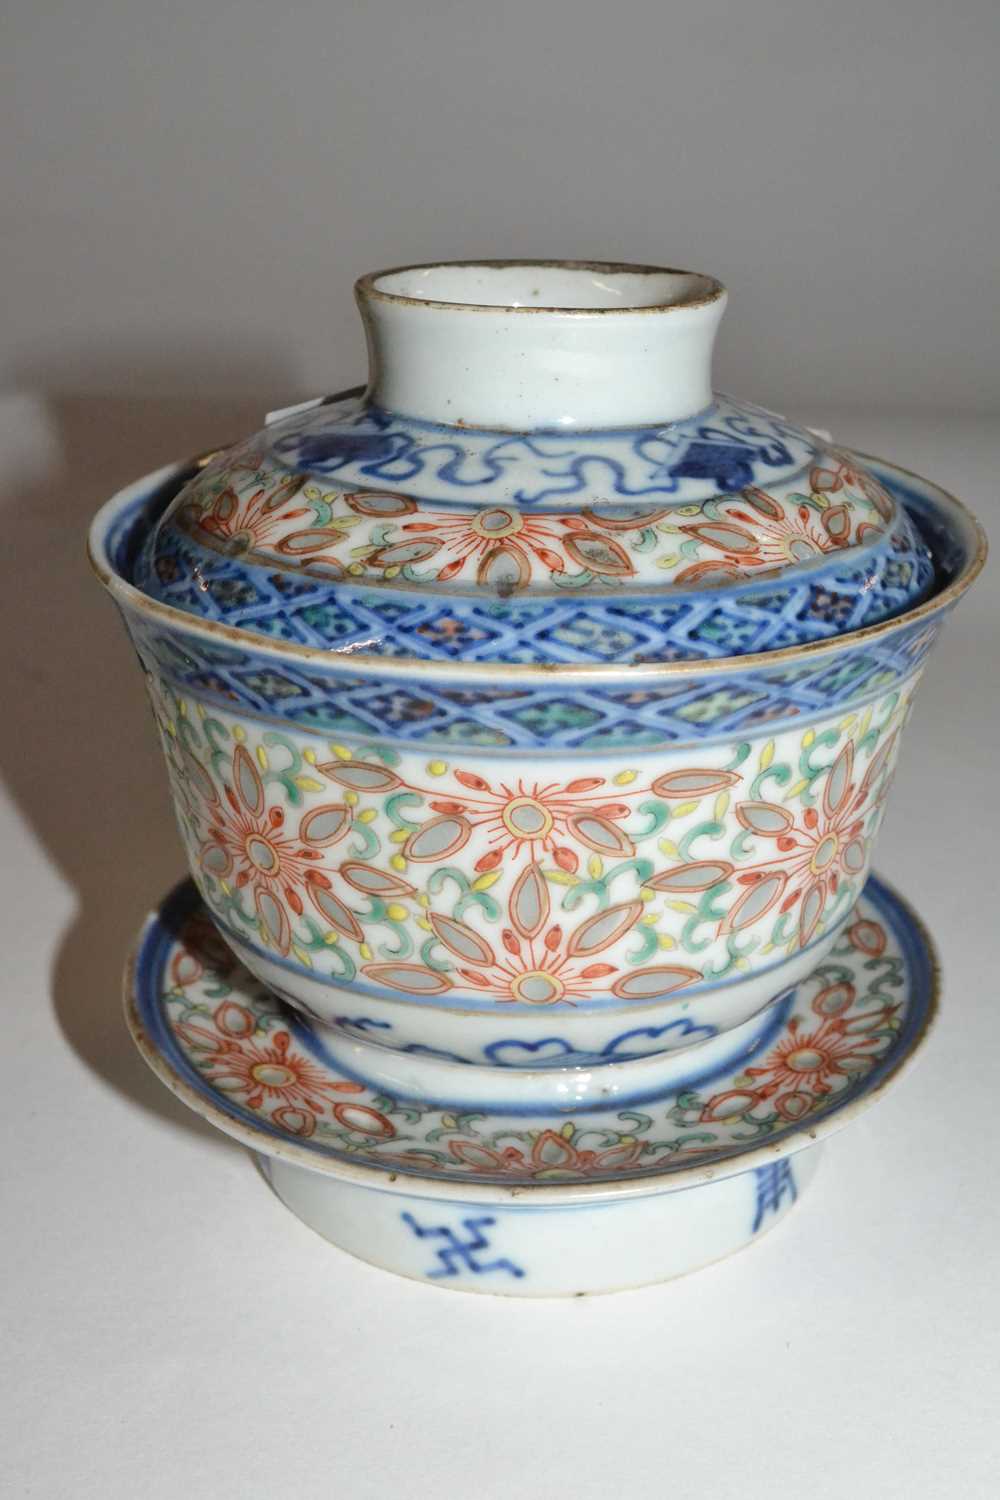 A Chinese porcelain rice bowl, cover and stand with rice grain polychrome design, the base with